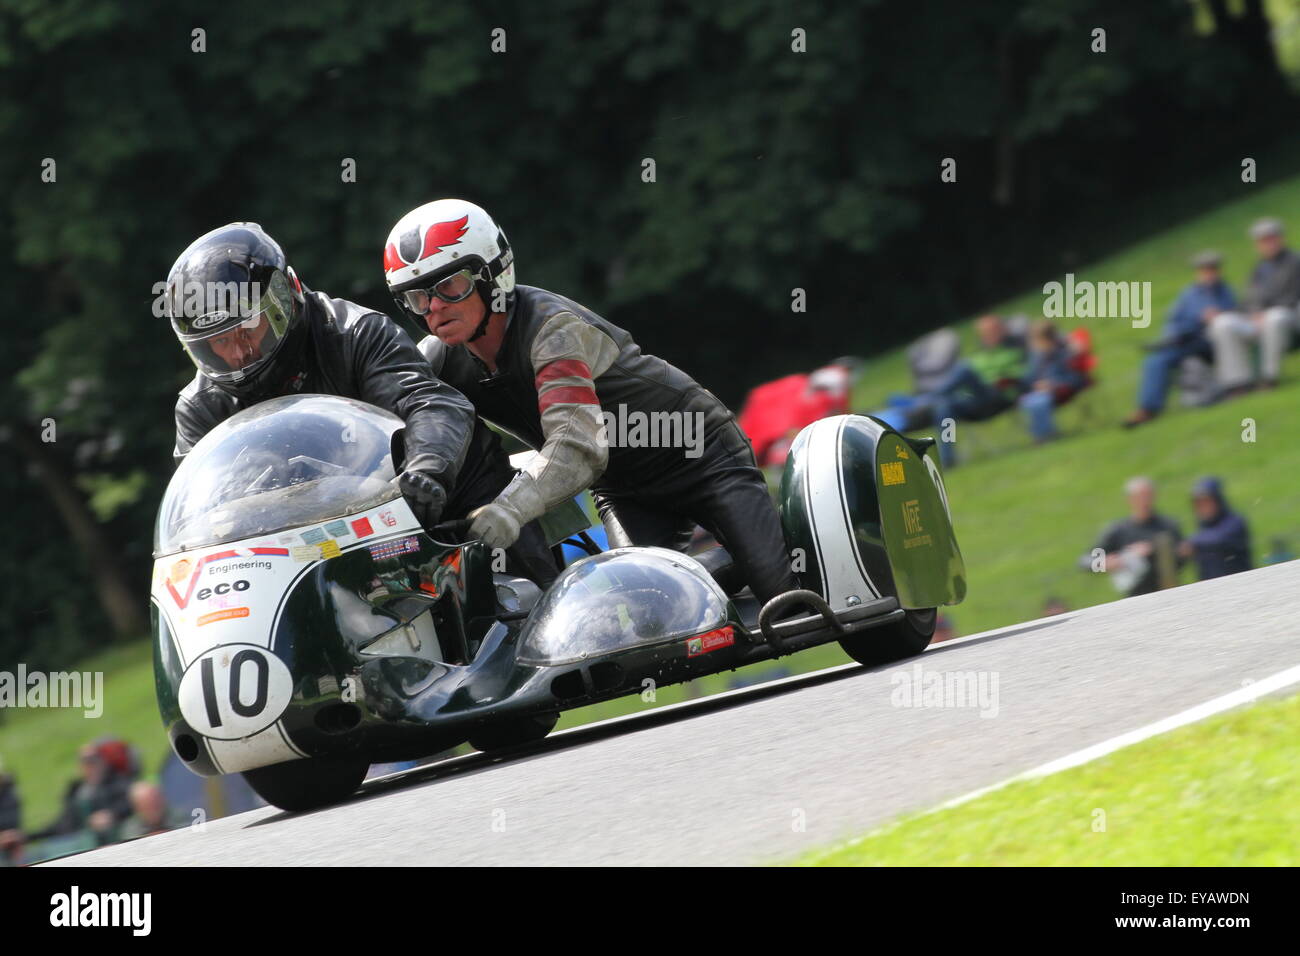 Sidecar racing was amongst the spectacles as classic bike fans from around the globe are gather this weekend at the historic Cadwell Park motor racing circuit in Lincolnshire UK to witness the greatest gathering of historic racing motorcycles in recent history. Stock Photo